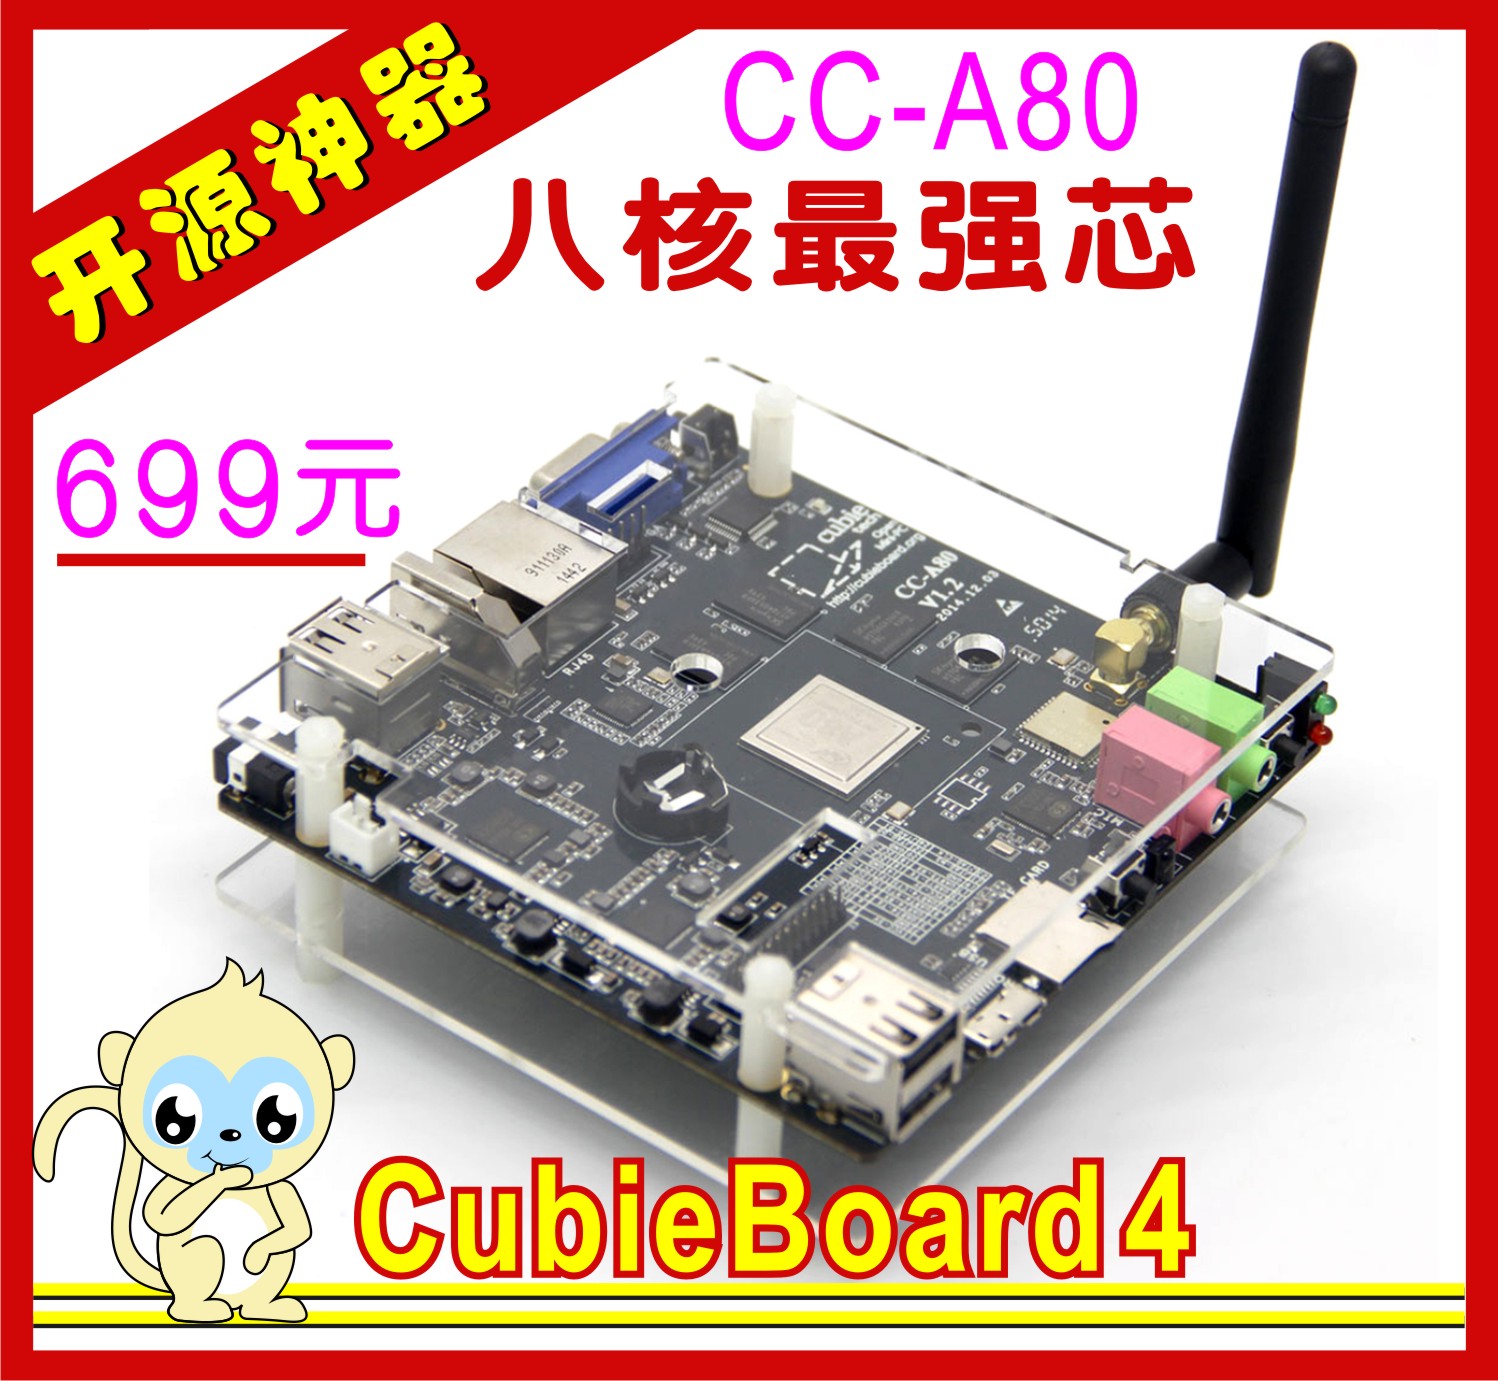 cubieboard4 cc-A80开发板 8核 android4.4超树